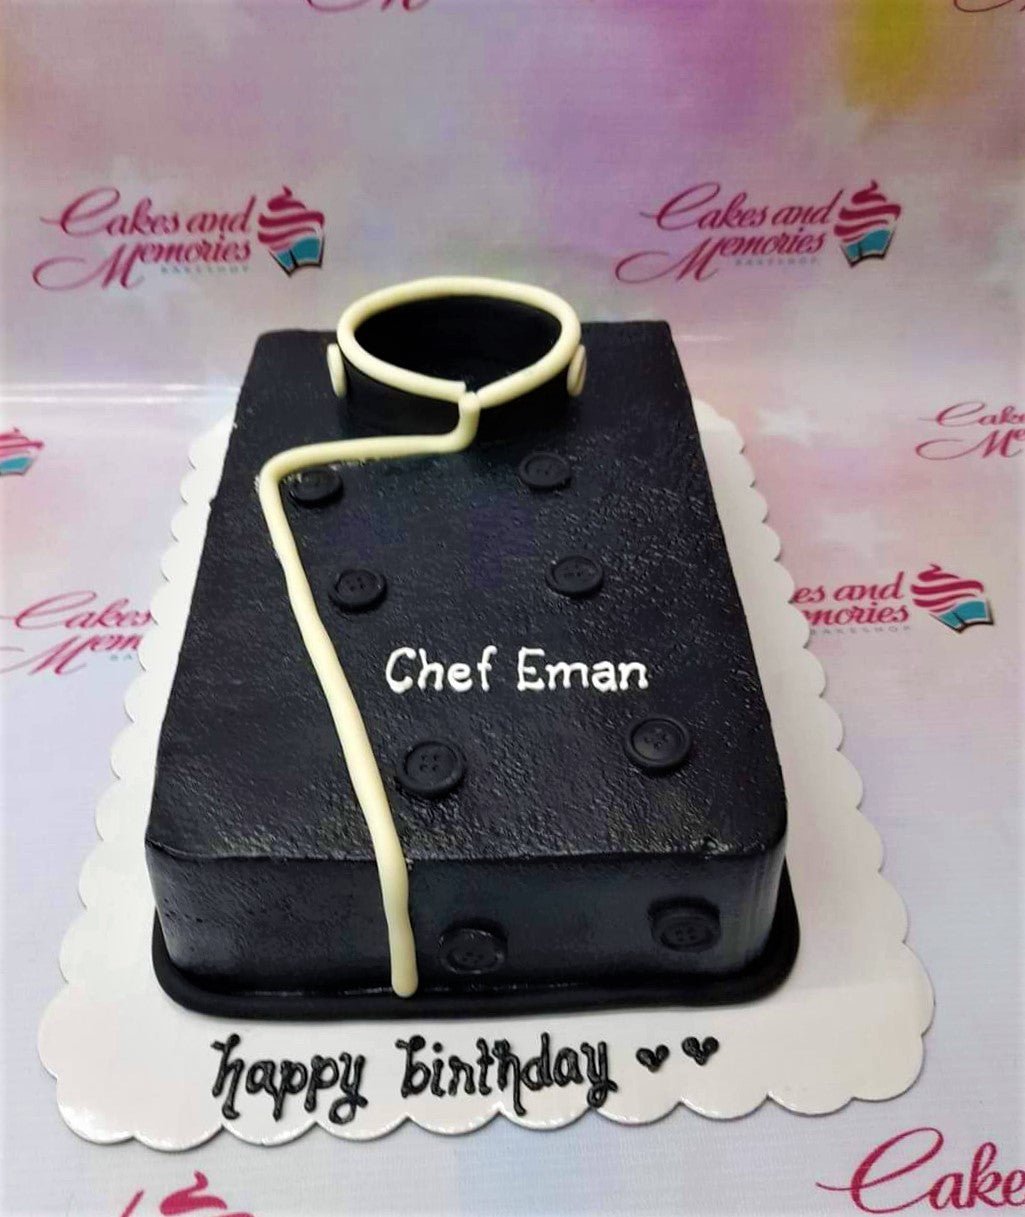 Pin on cakes from chefbakers